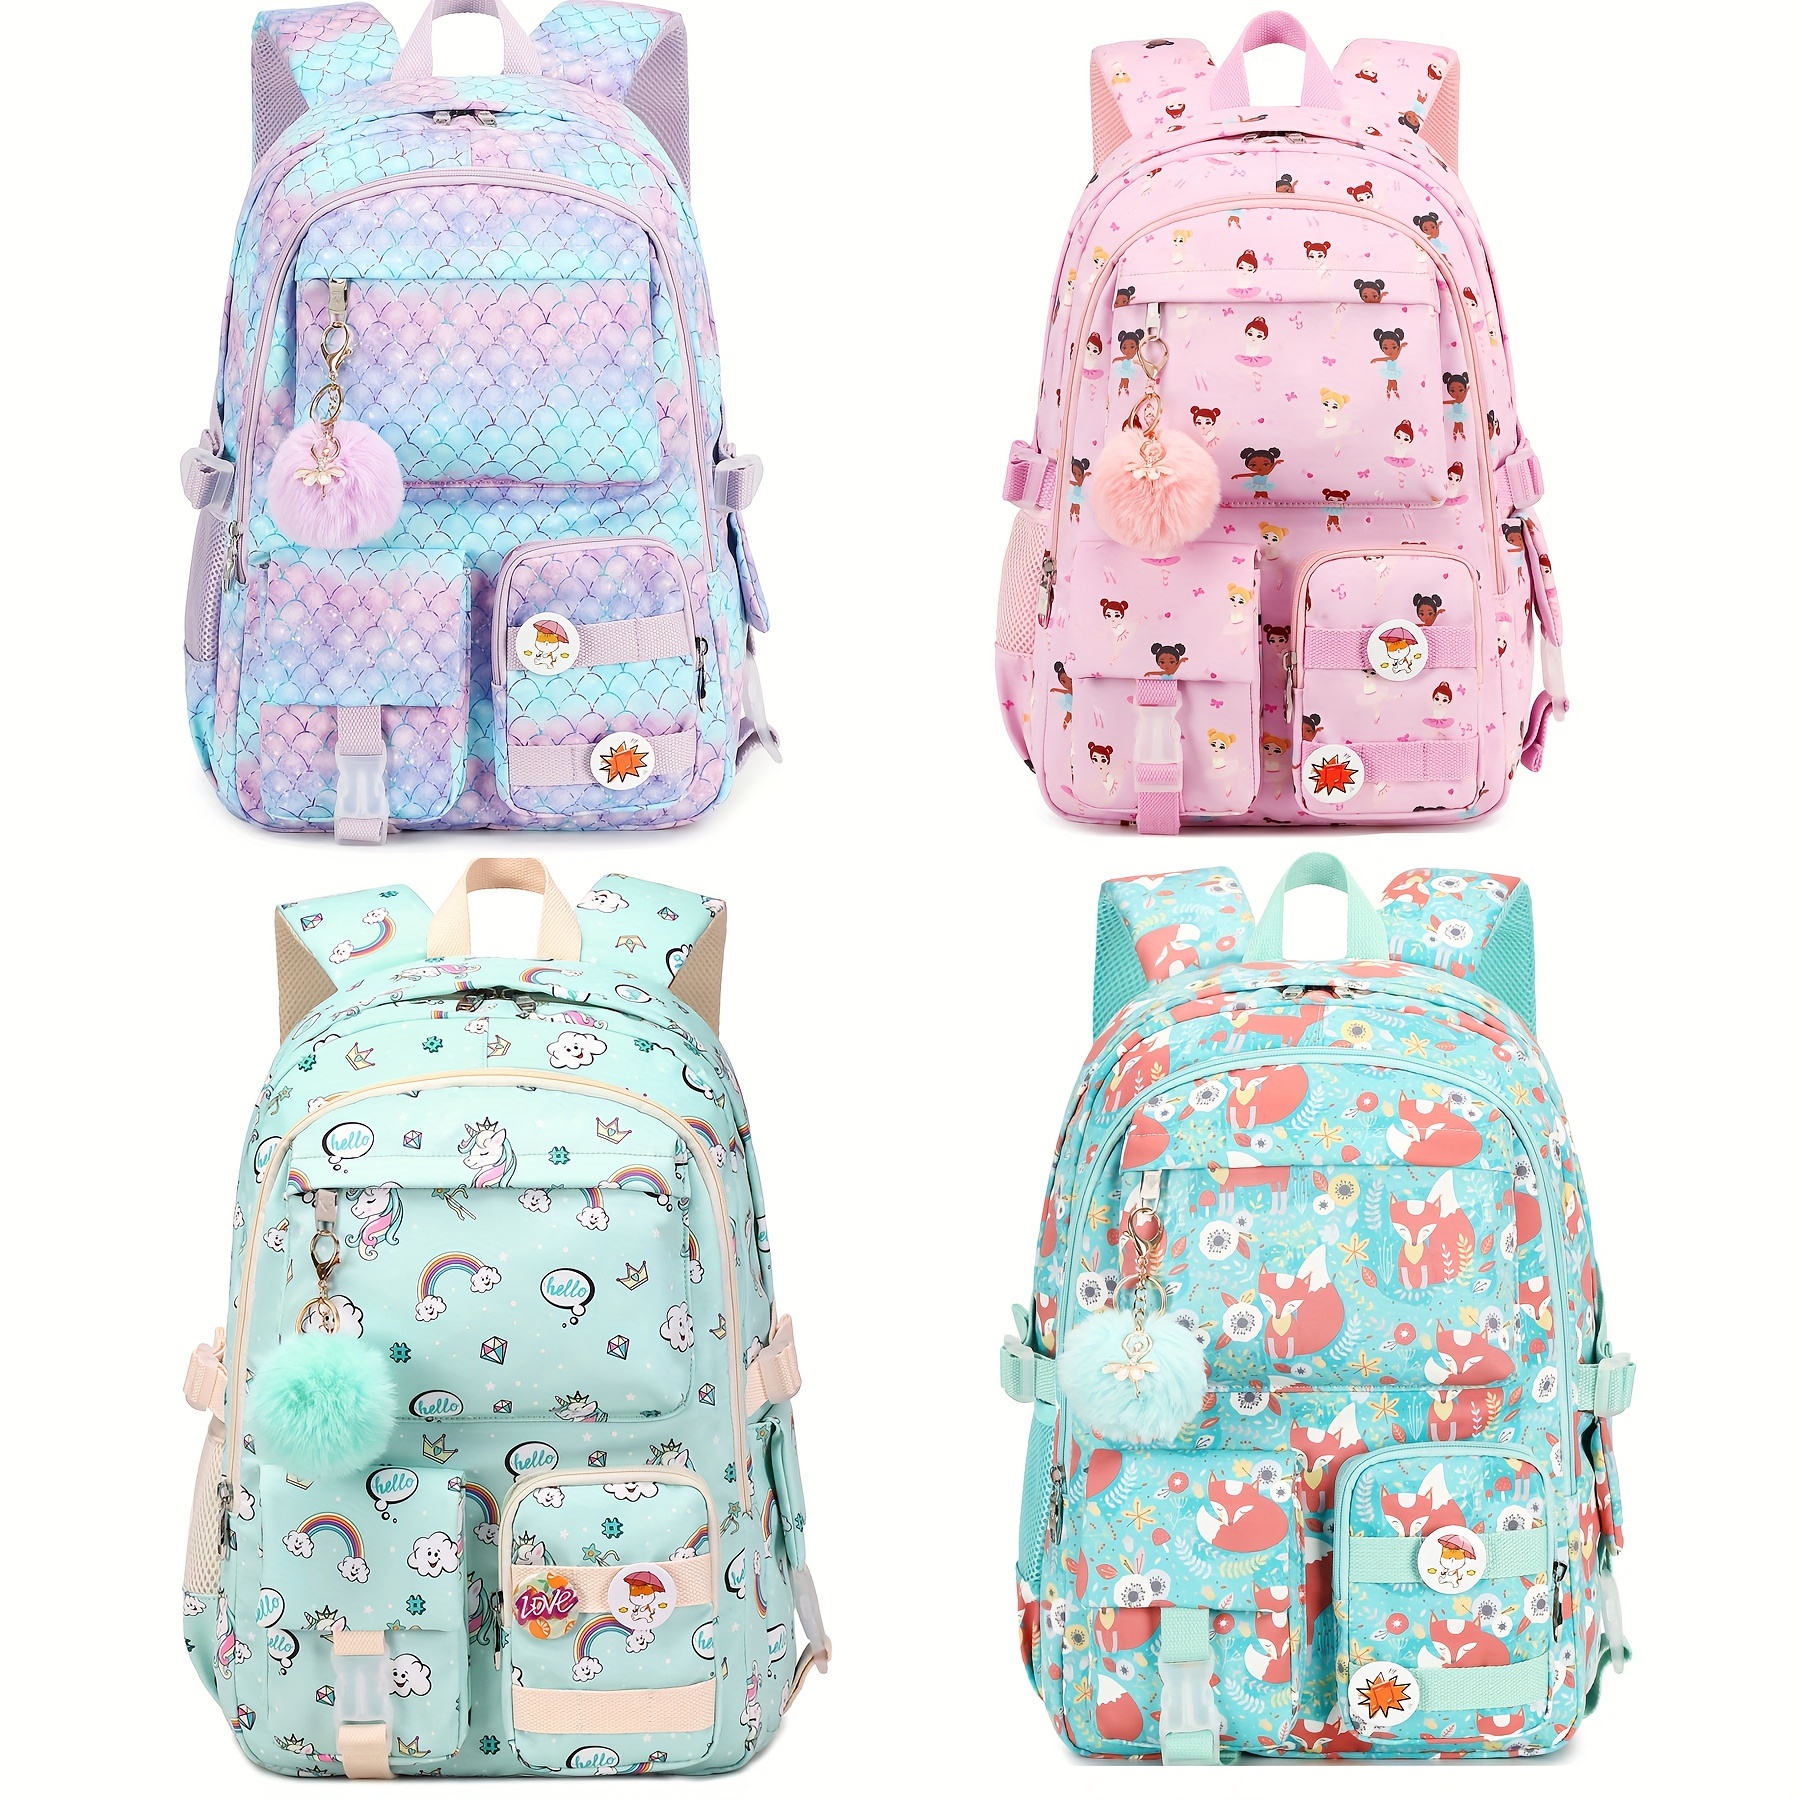 

15.6-inch Laptop Mermaid Scale School Bag, Nylon, College Style, Multi-compartment, Anti-theft Travel Backpack